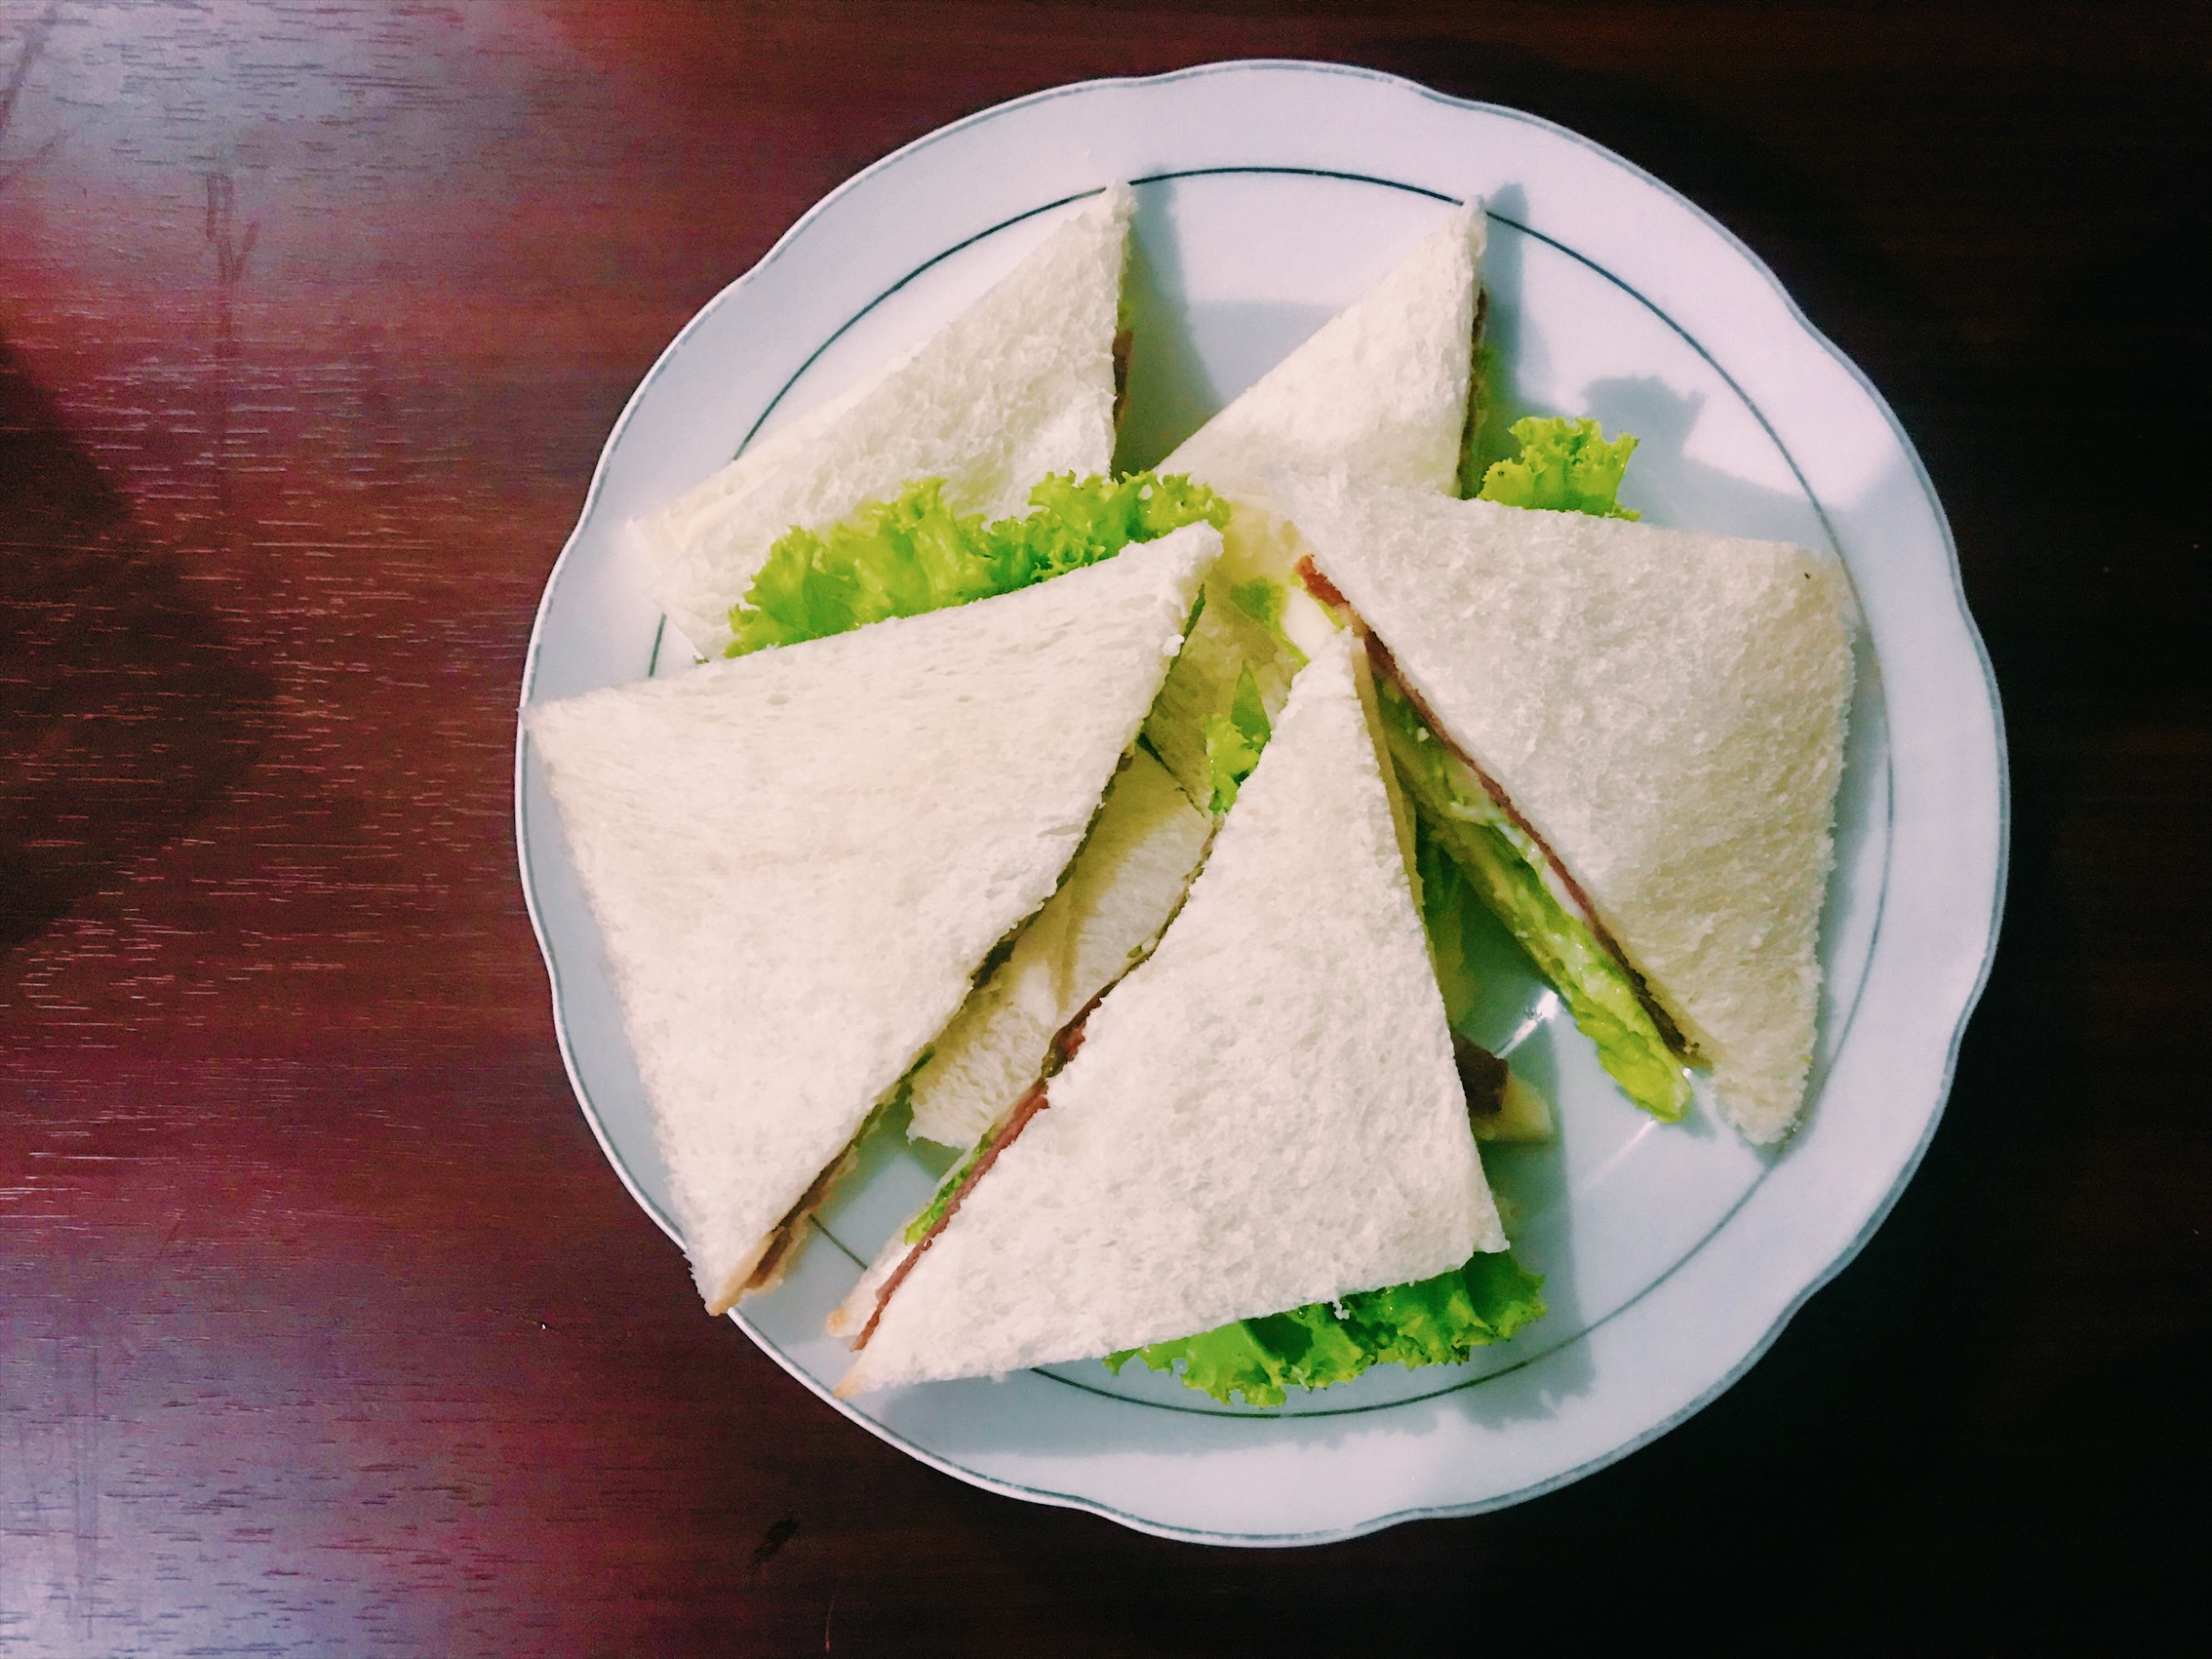 Resep deCODE: Ham and Cheese Sandwich